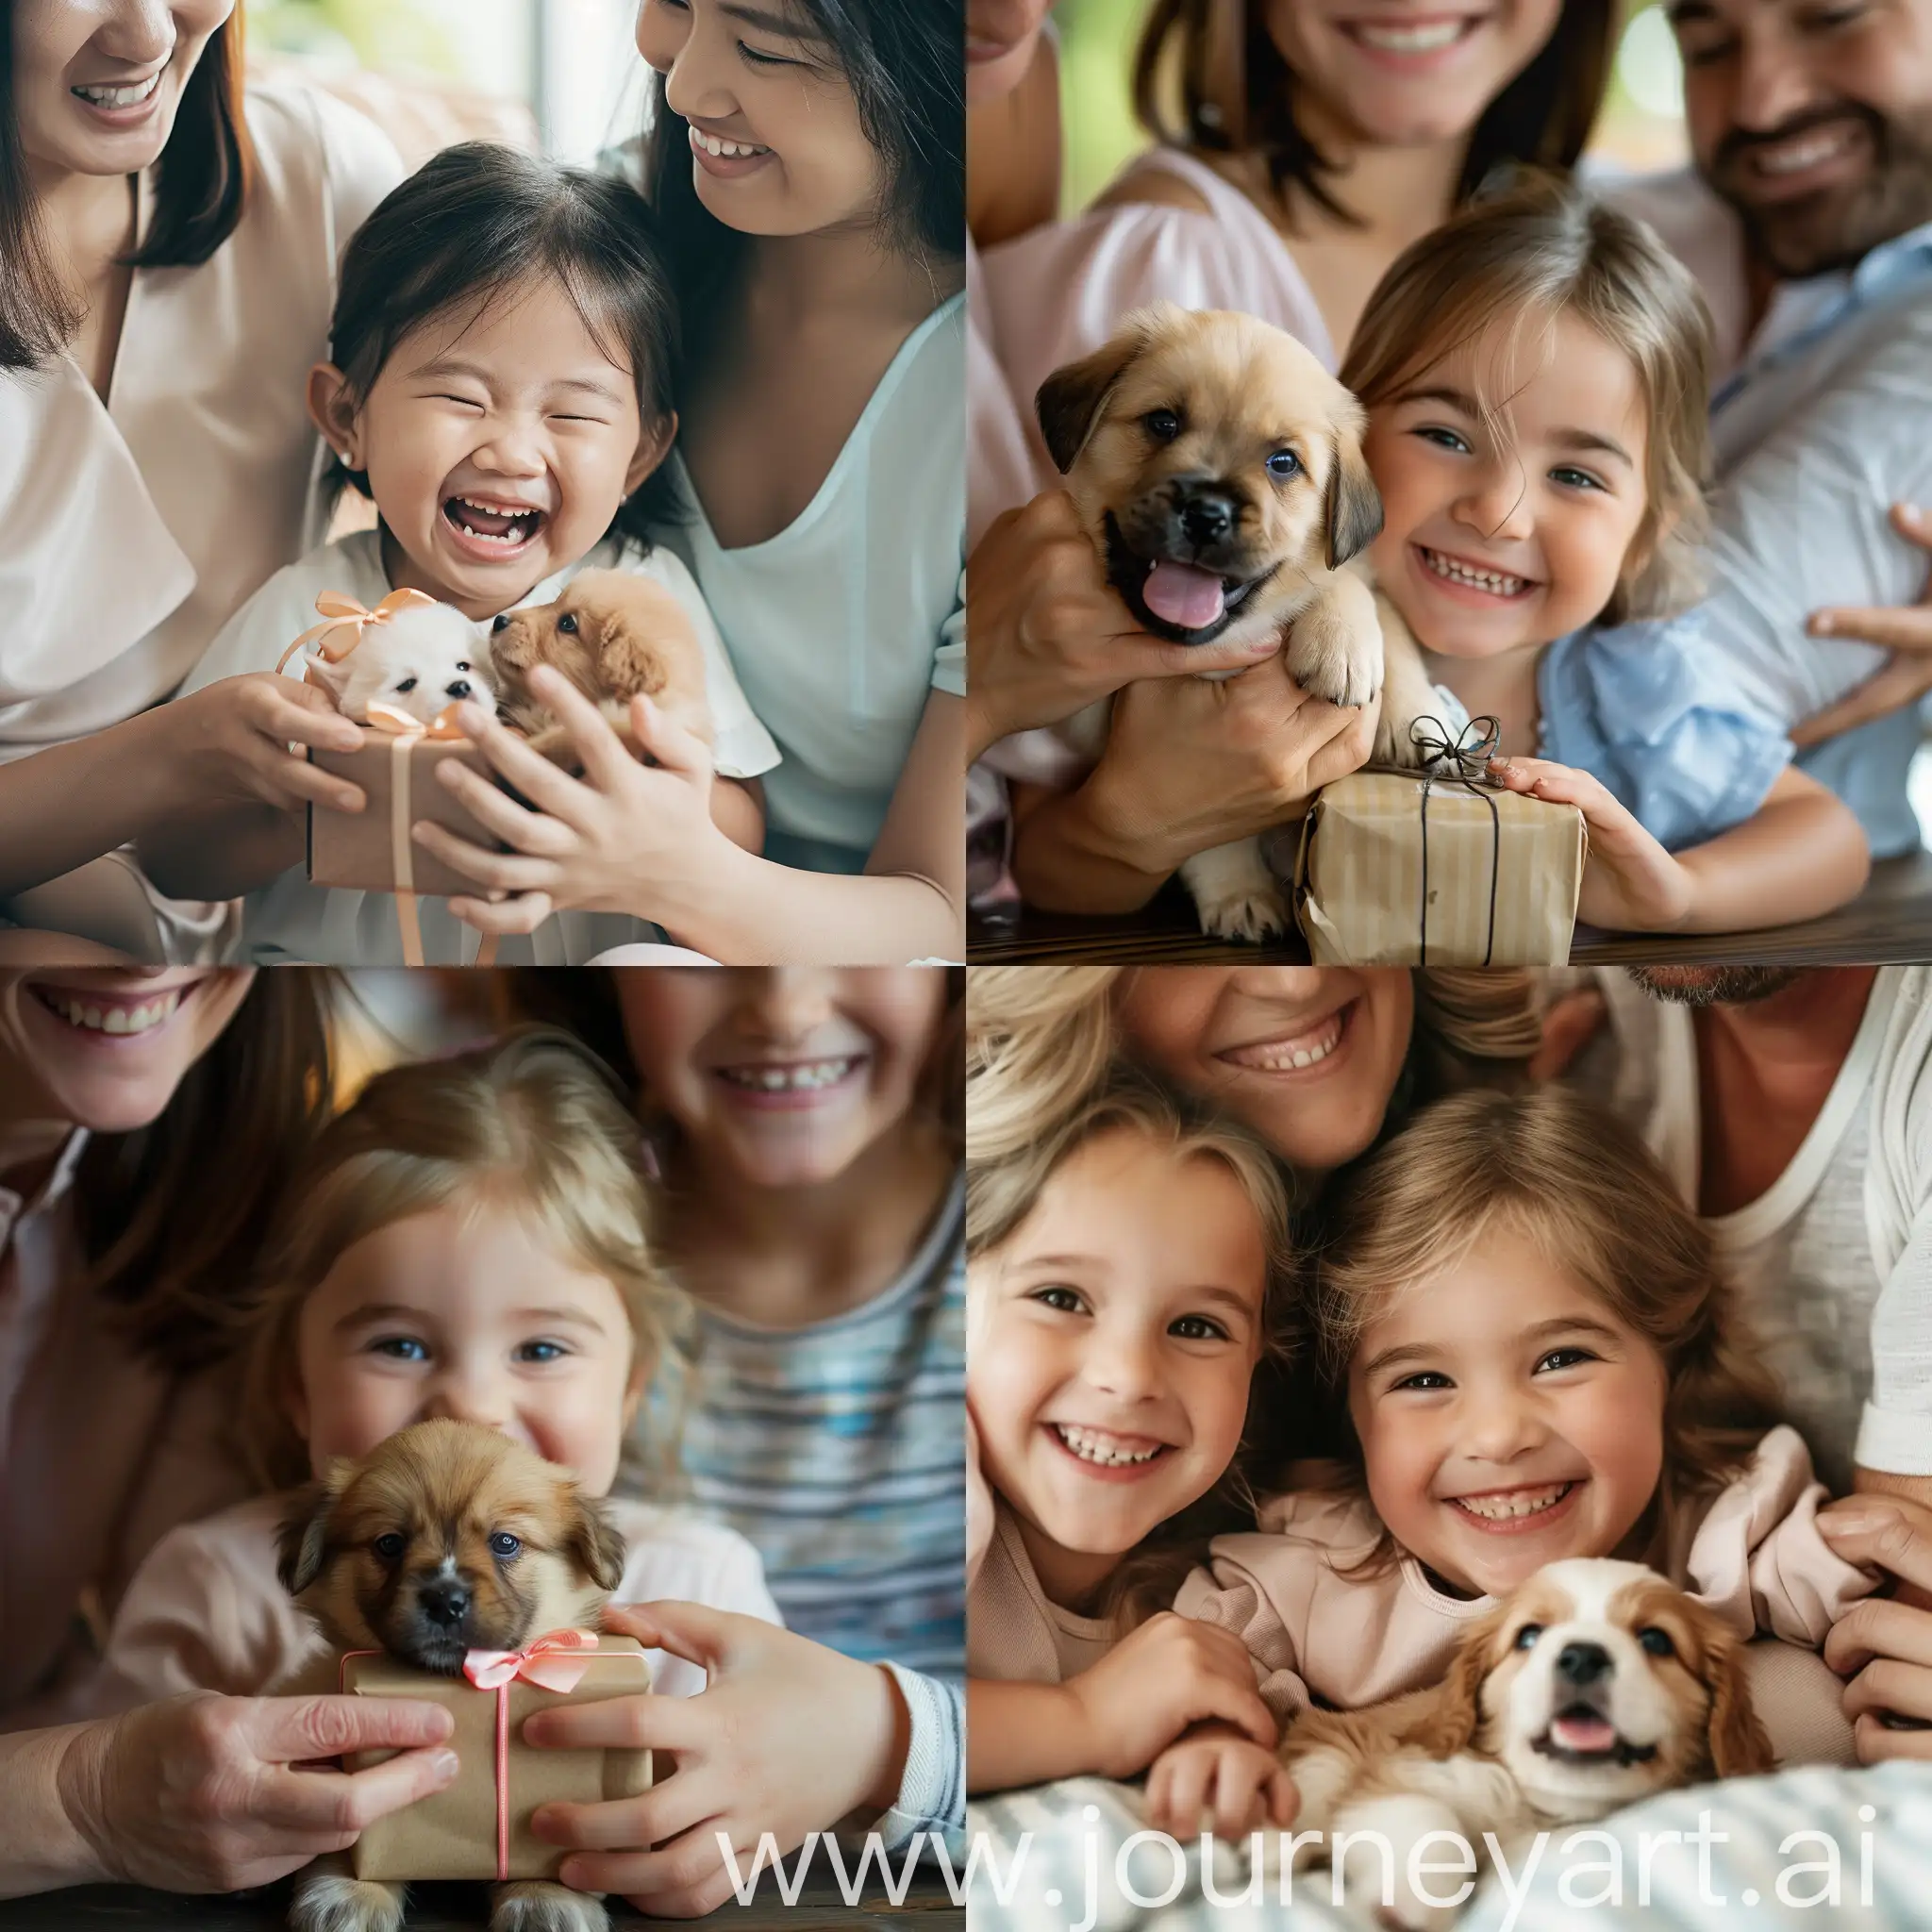 Joyful-Little-Girl-Delighted-with-Surprise-Puppy-Gift